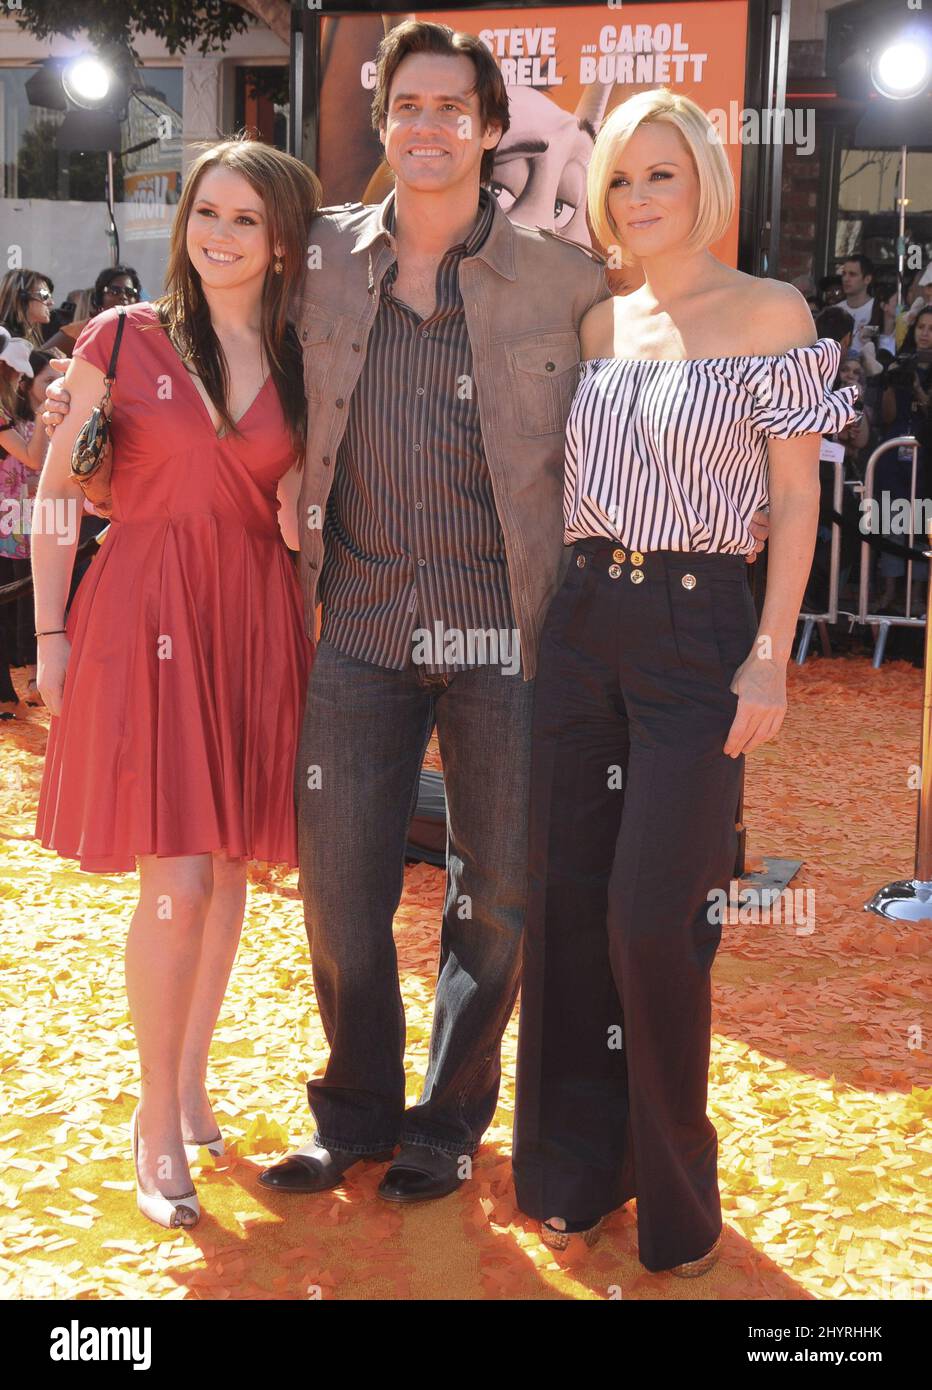 Jim Carrey, daughter Jane Carrey and Jenny McCarthy arriving at the premiere of 'Horton Hears A Who' held at the Mann Village Theatre in Westwood, California. Stock Photo